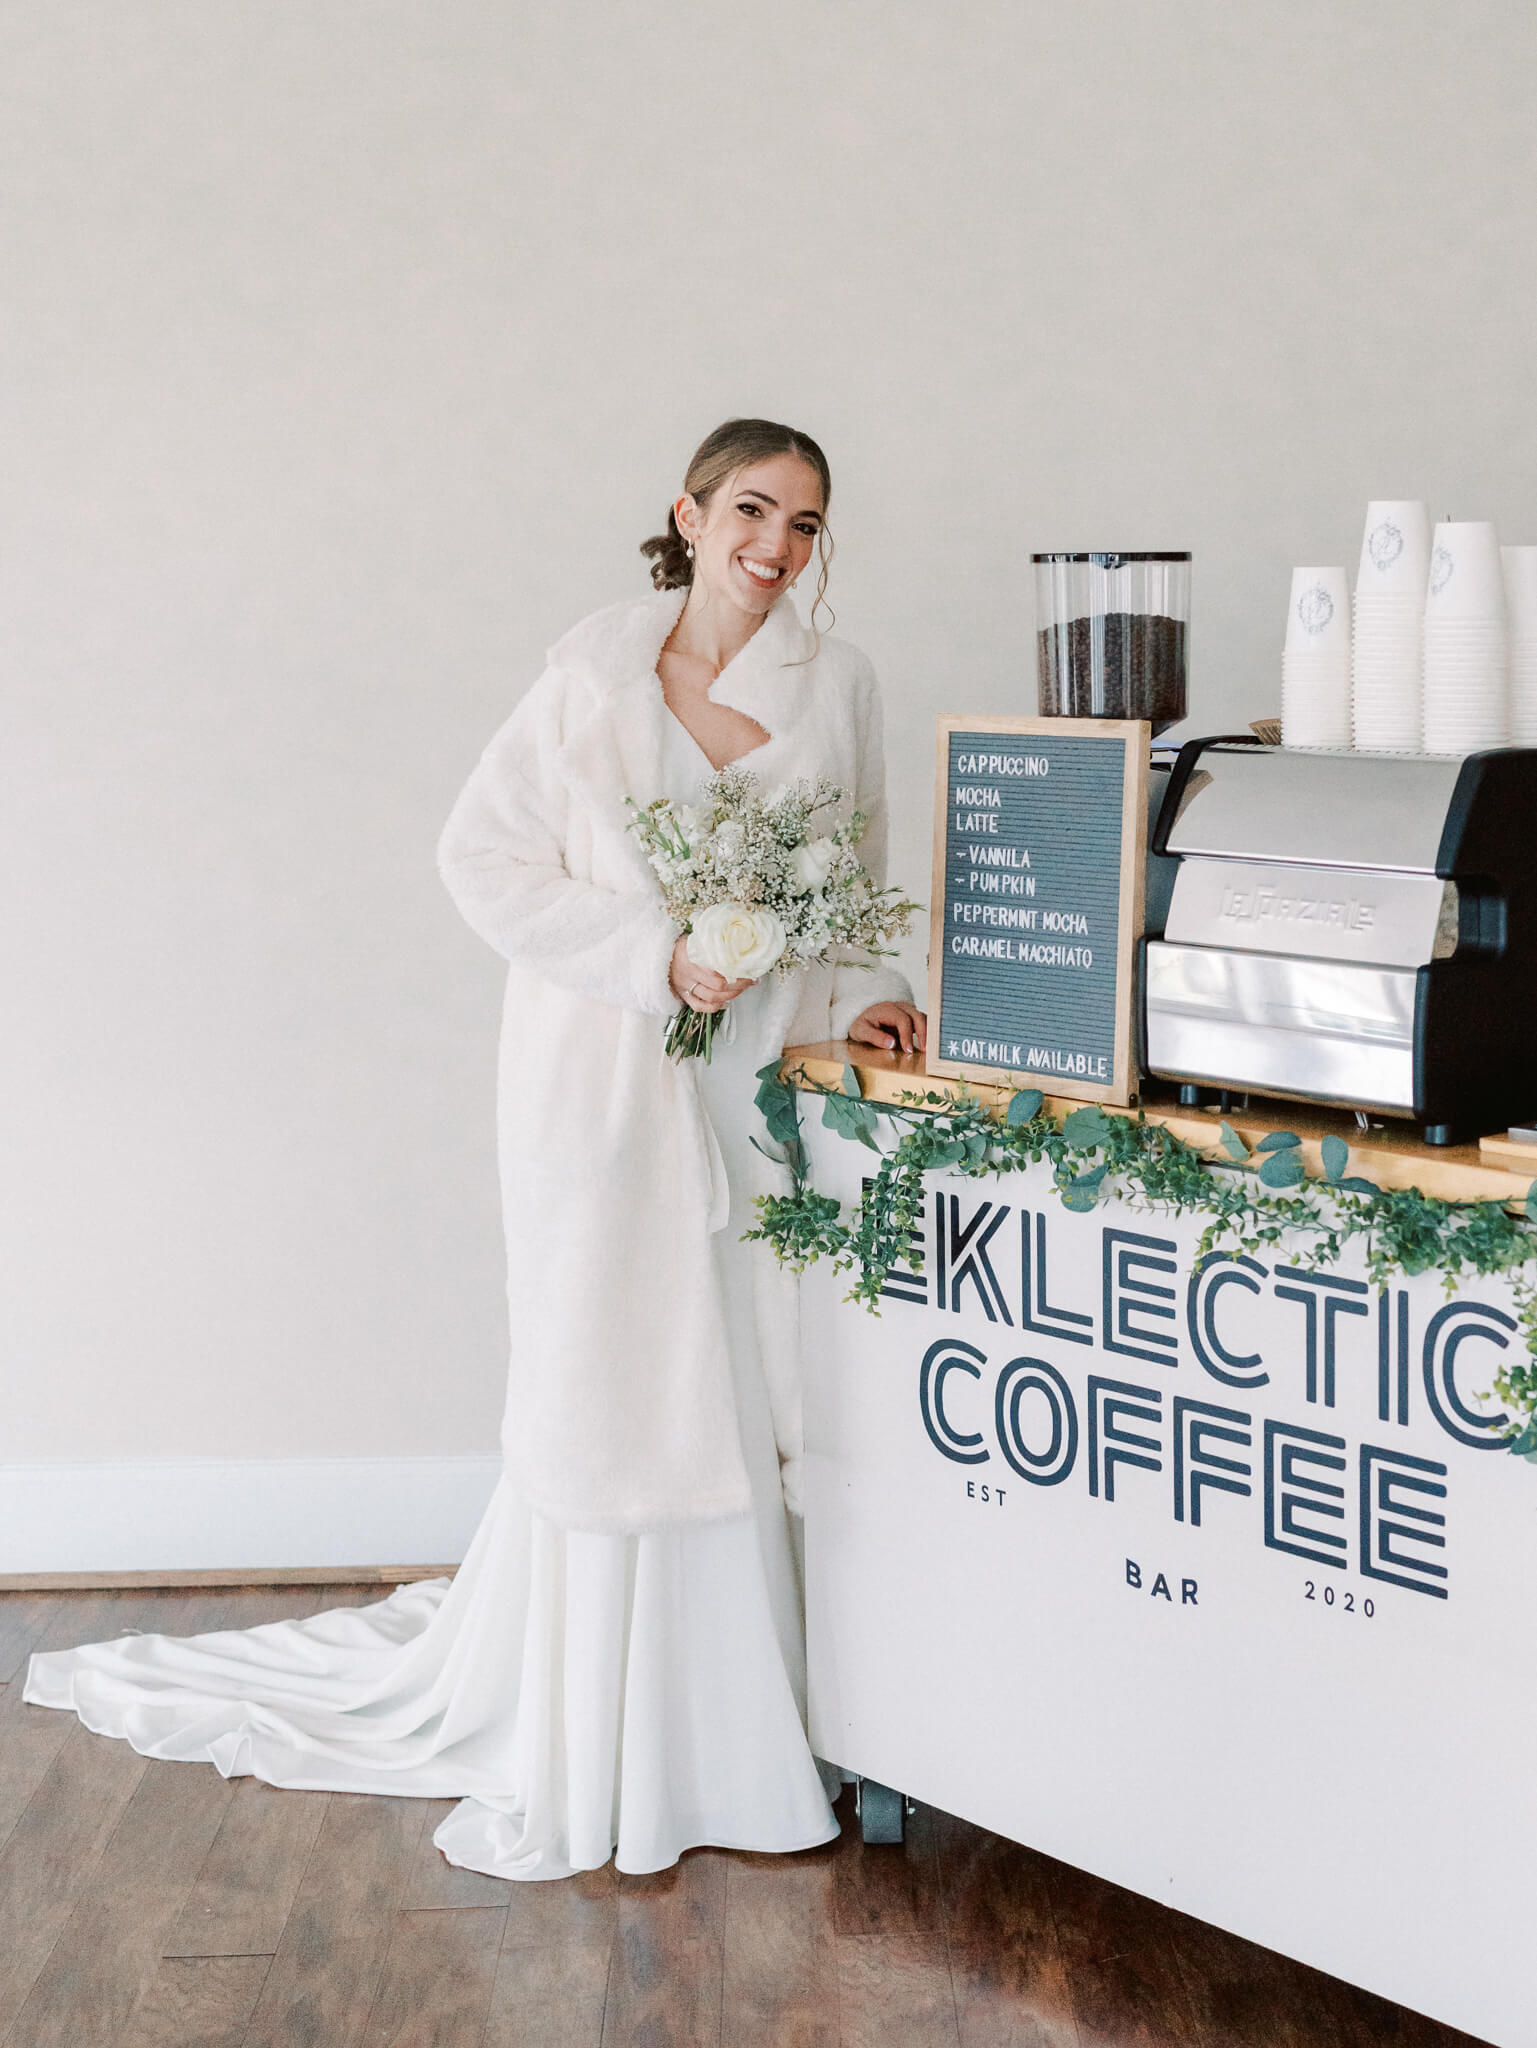 A bride standing next to her coffee bar cart.